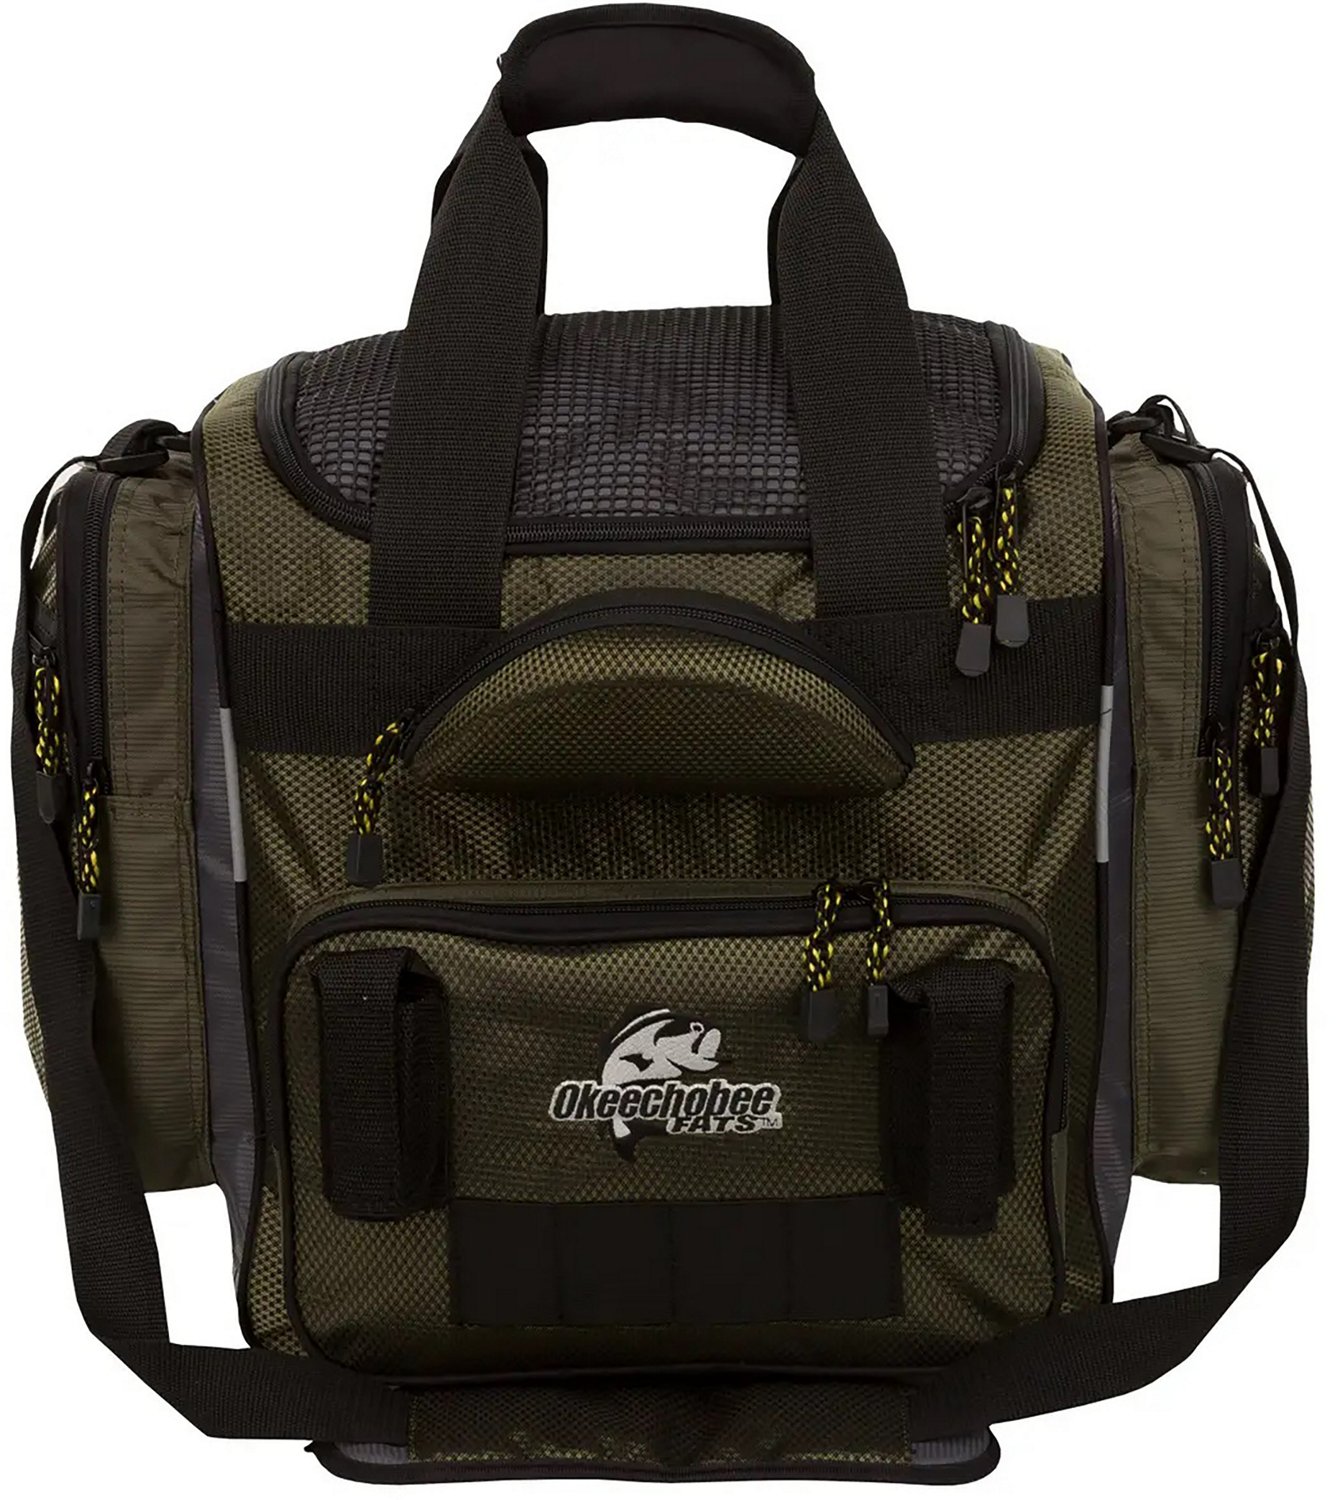 Okeechobee Fats T1200 Series Tackle Bag                                                                                          - view number 1 selected